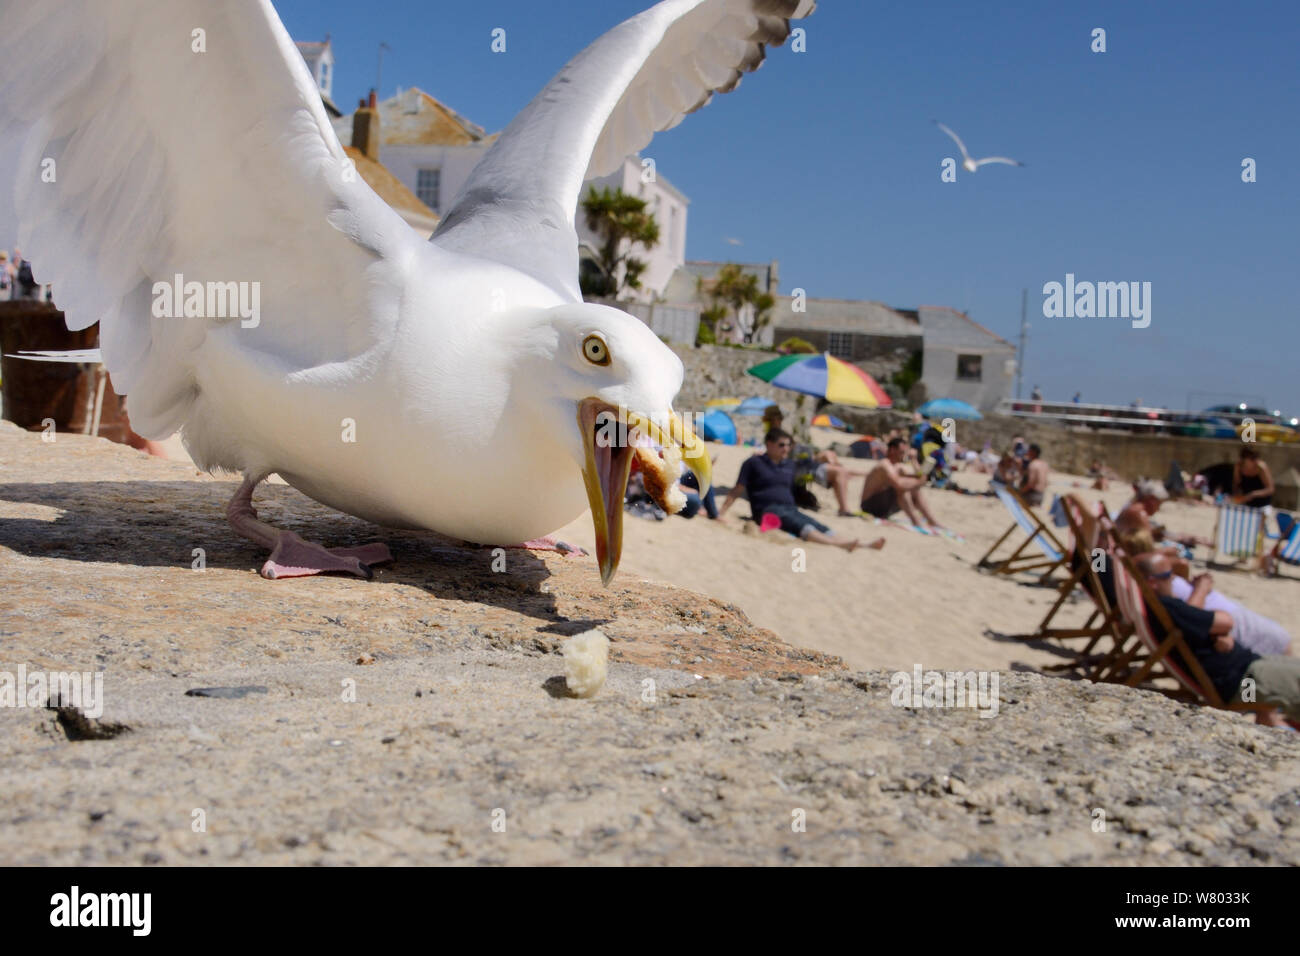 Adult Herring gull (Larus argentatus) scavenging left over food on beach, St.Ives, Cornwall, UK, June. Editorial use only. Stock Photo